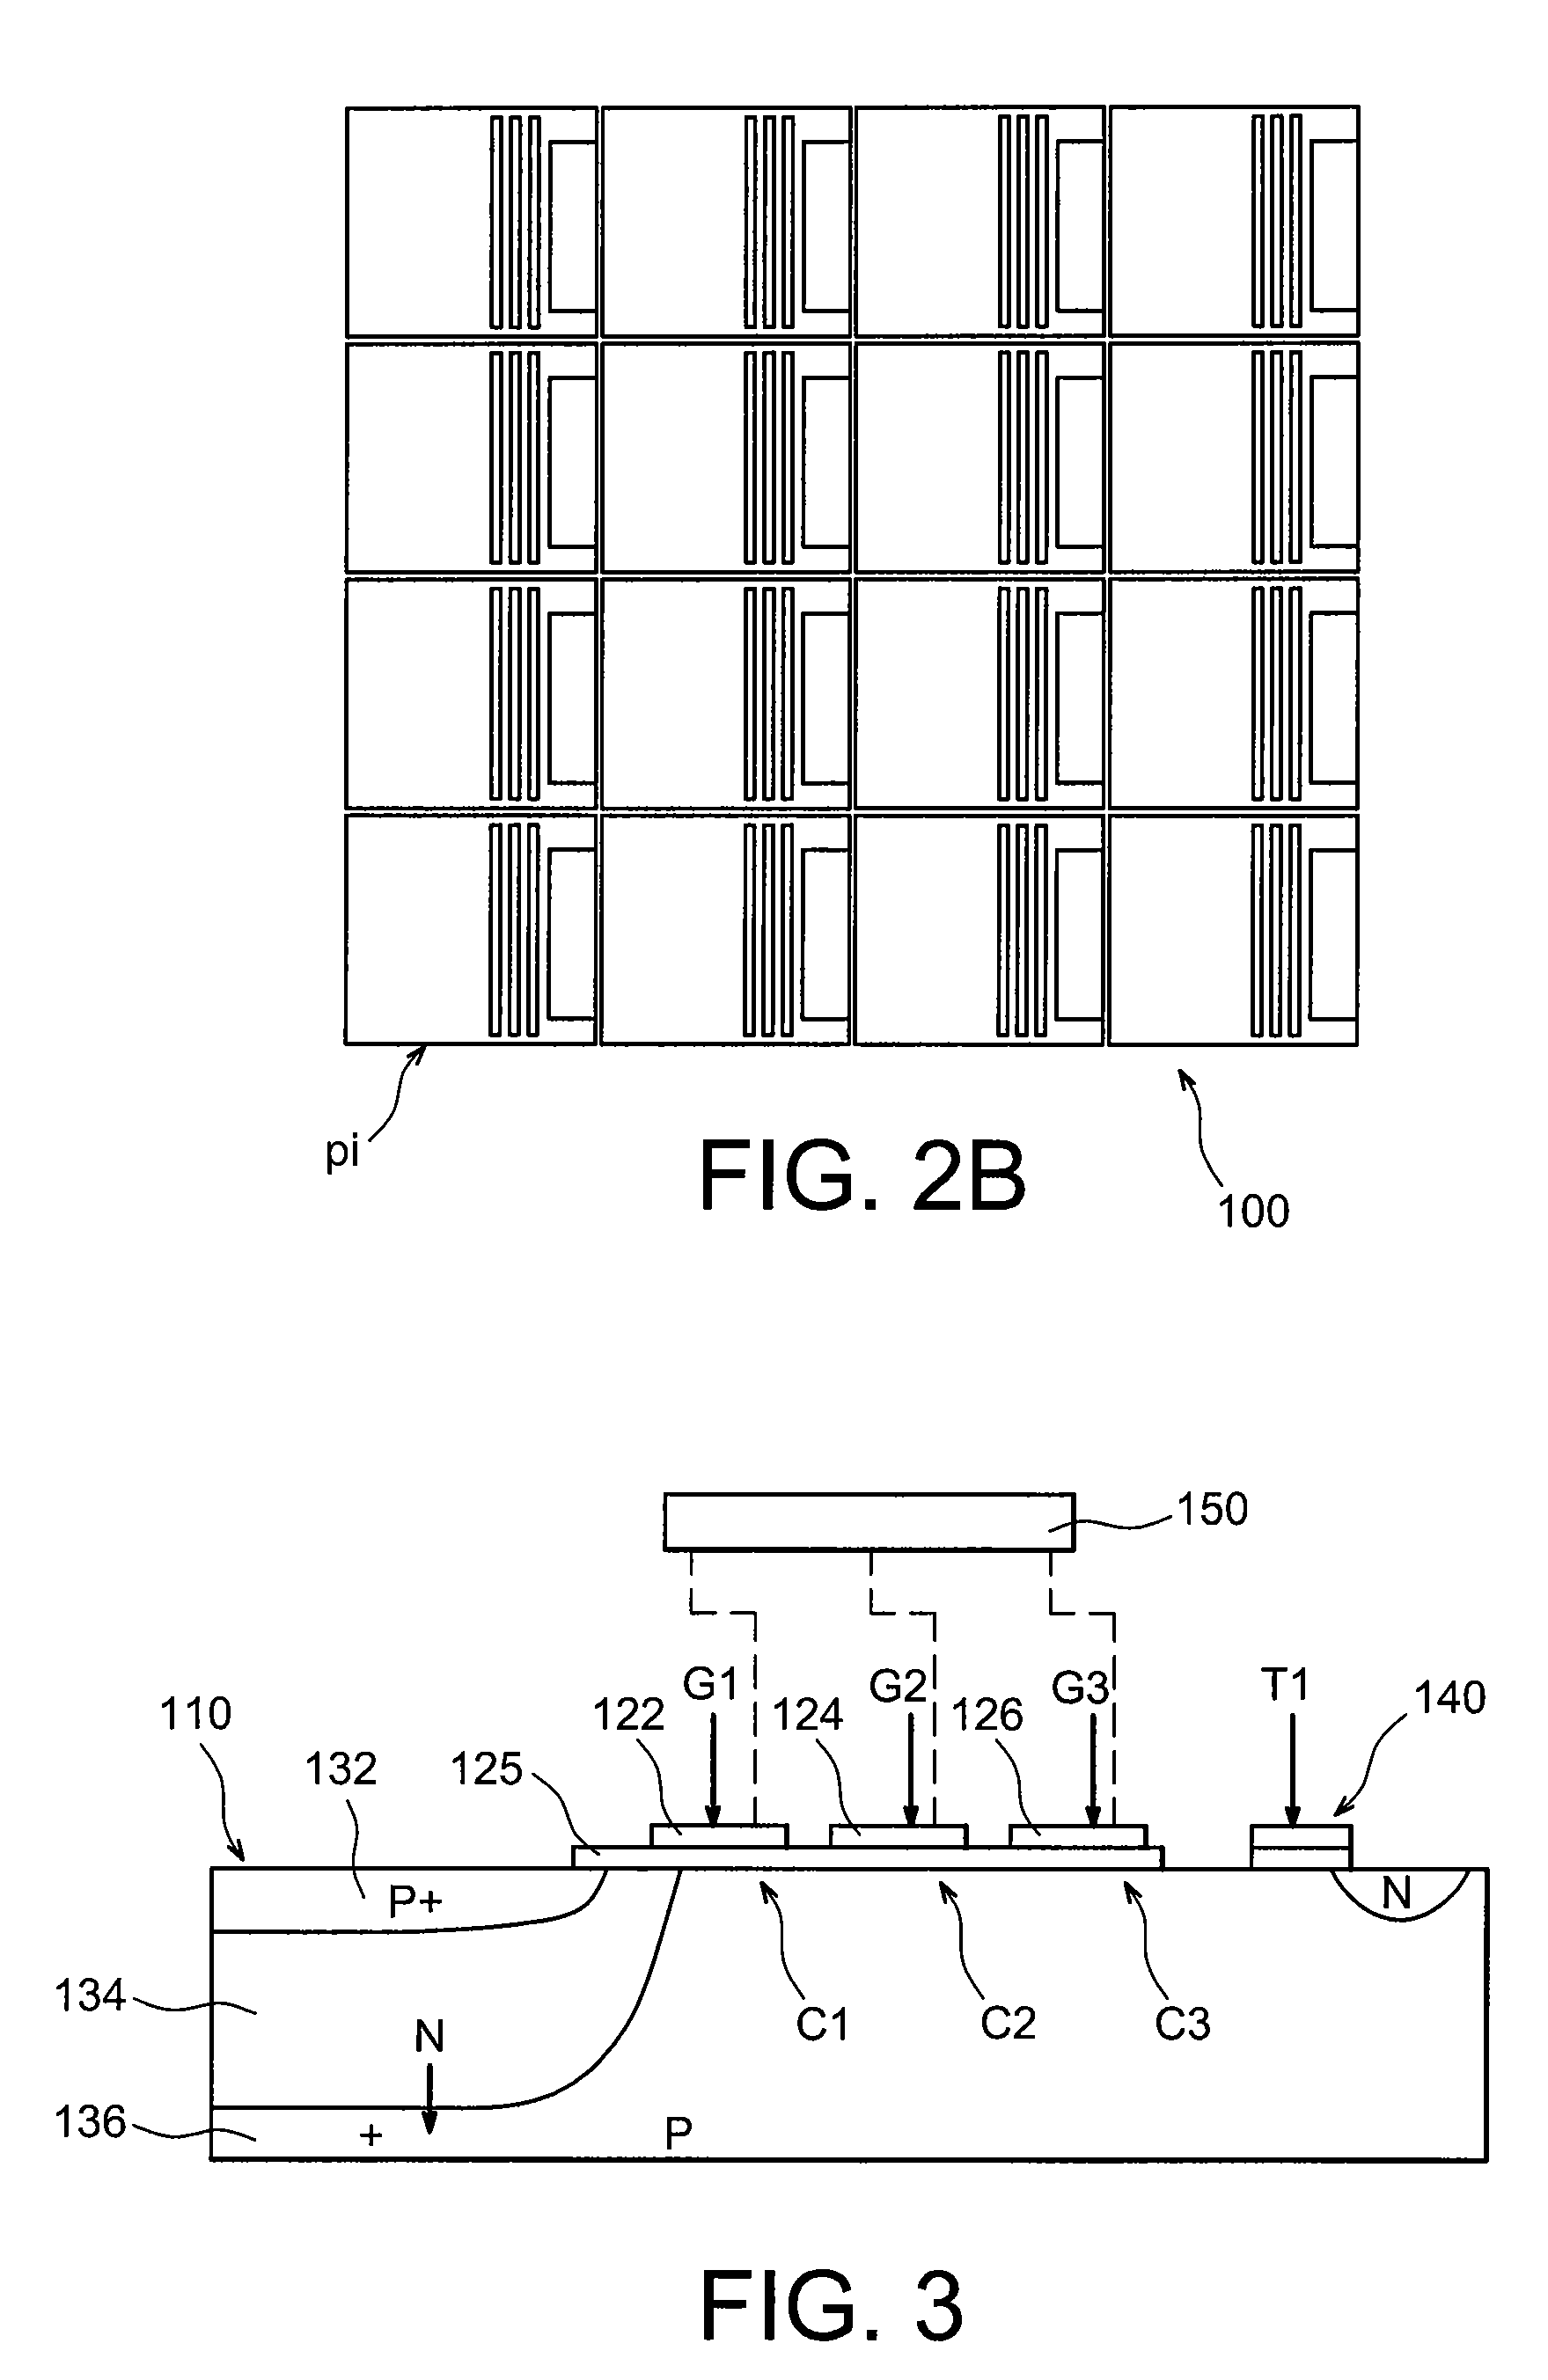 Photosensitive microelectronic device with avalanche multipliers